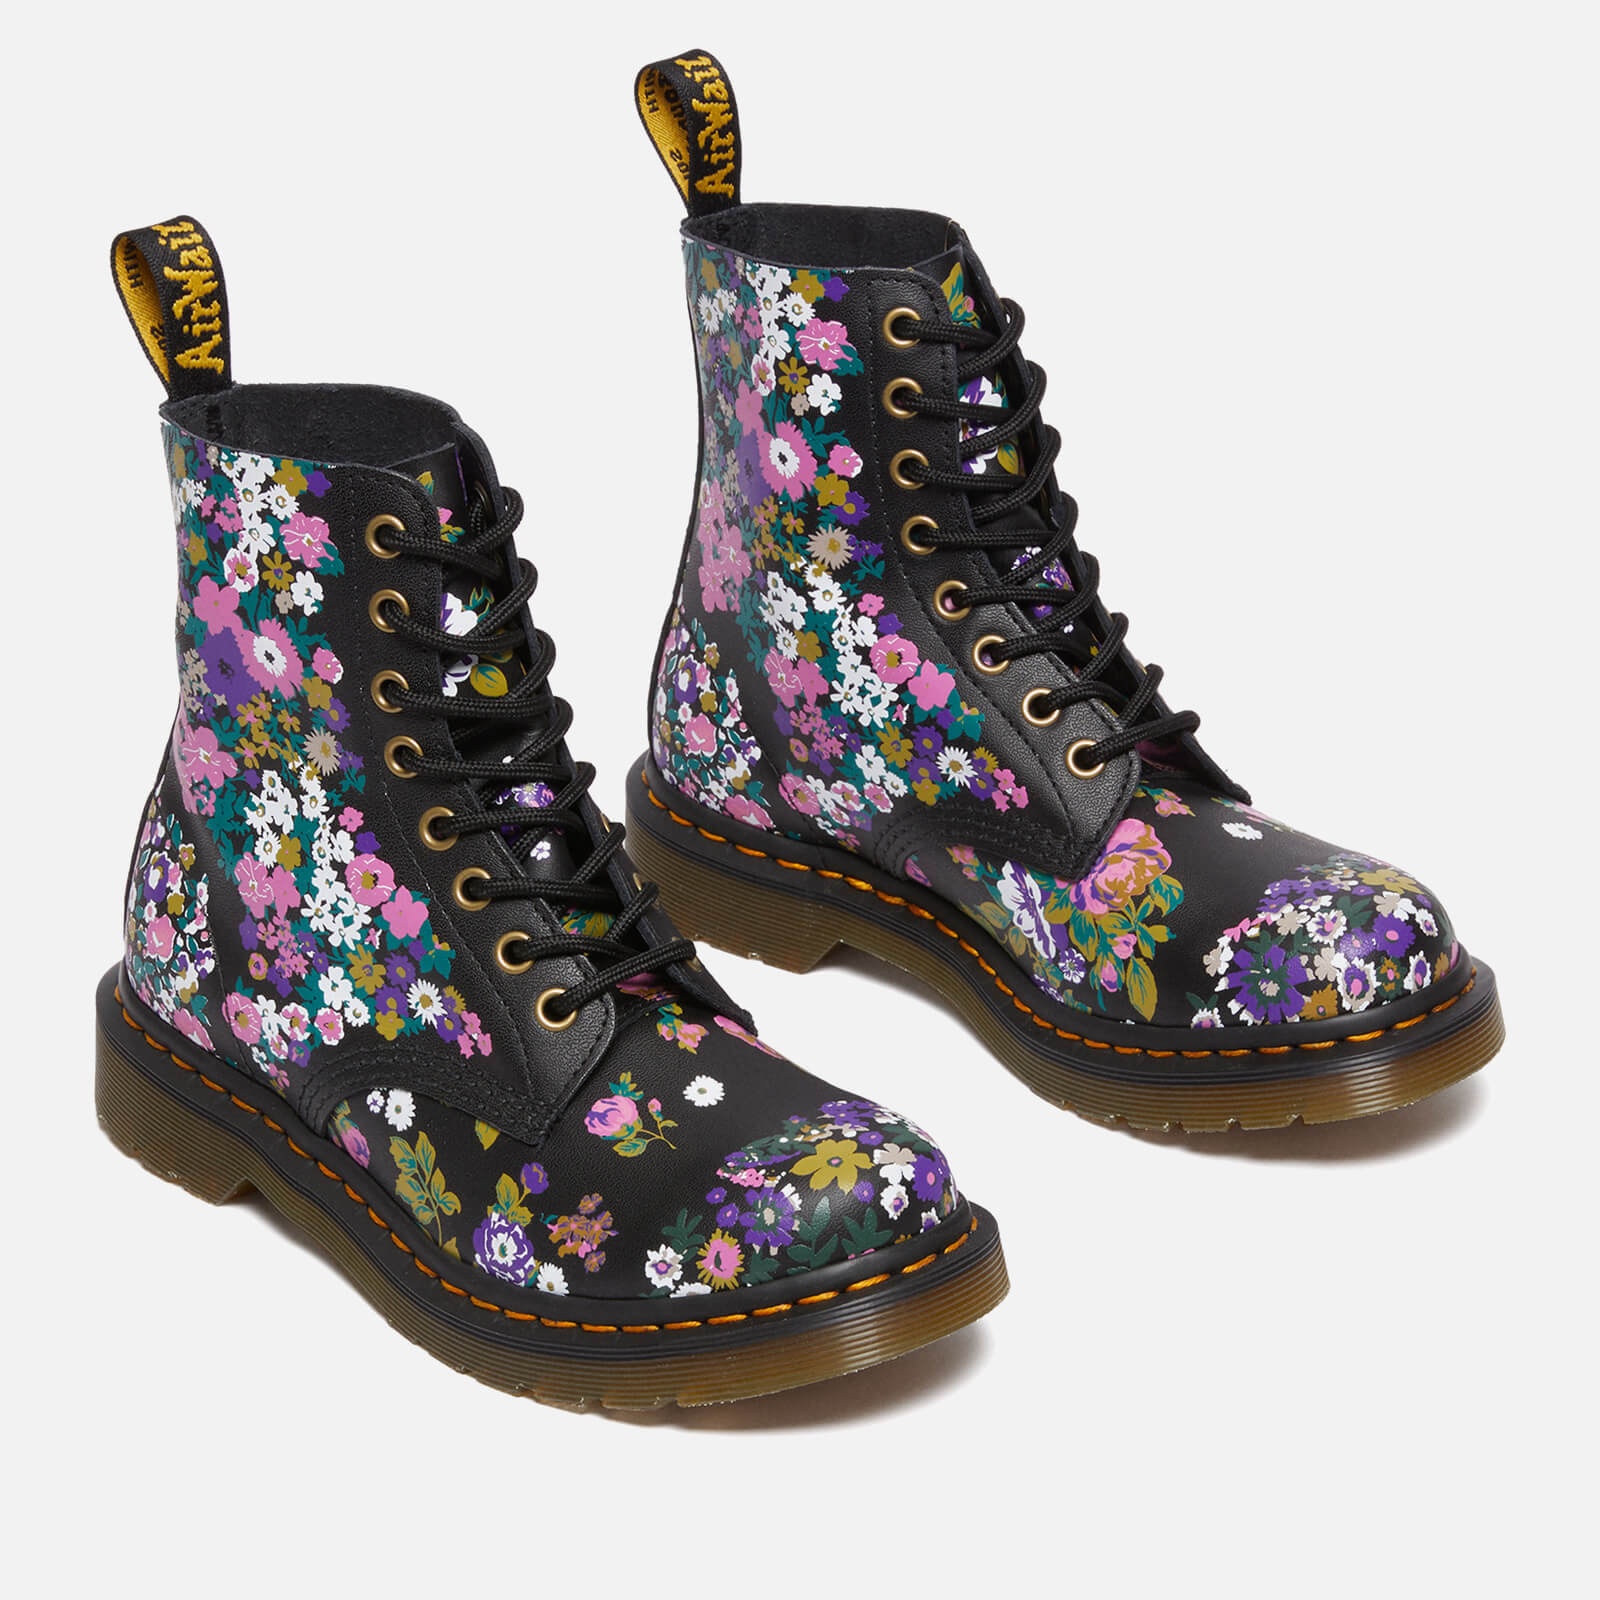 Dr. Martens Women's 1460 Pascal Leather 8-Eye Boots - Uk 3